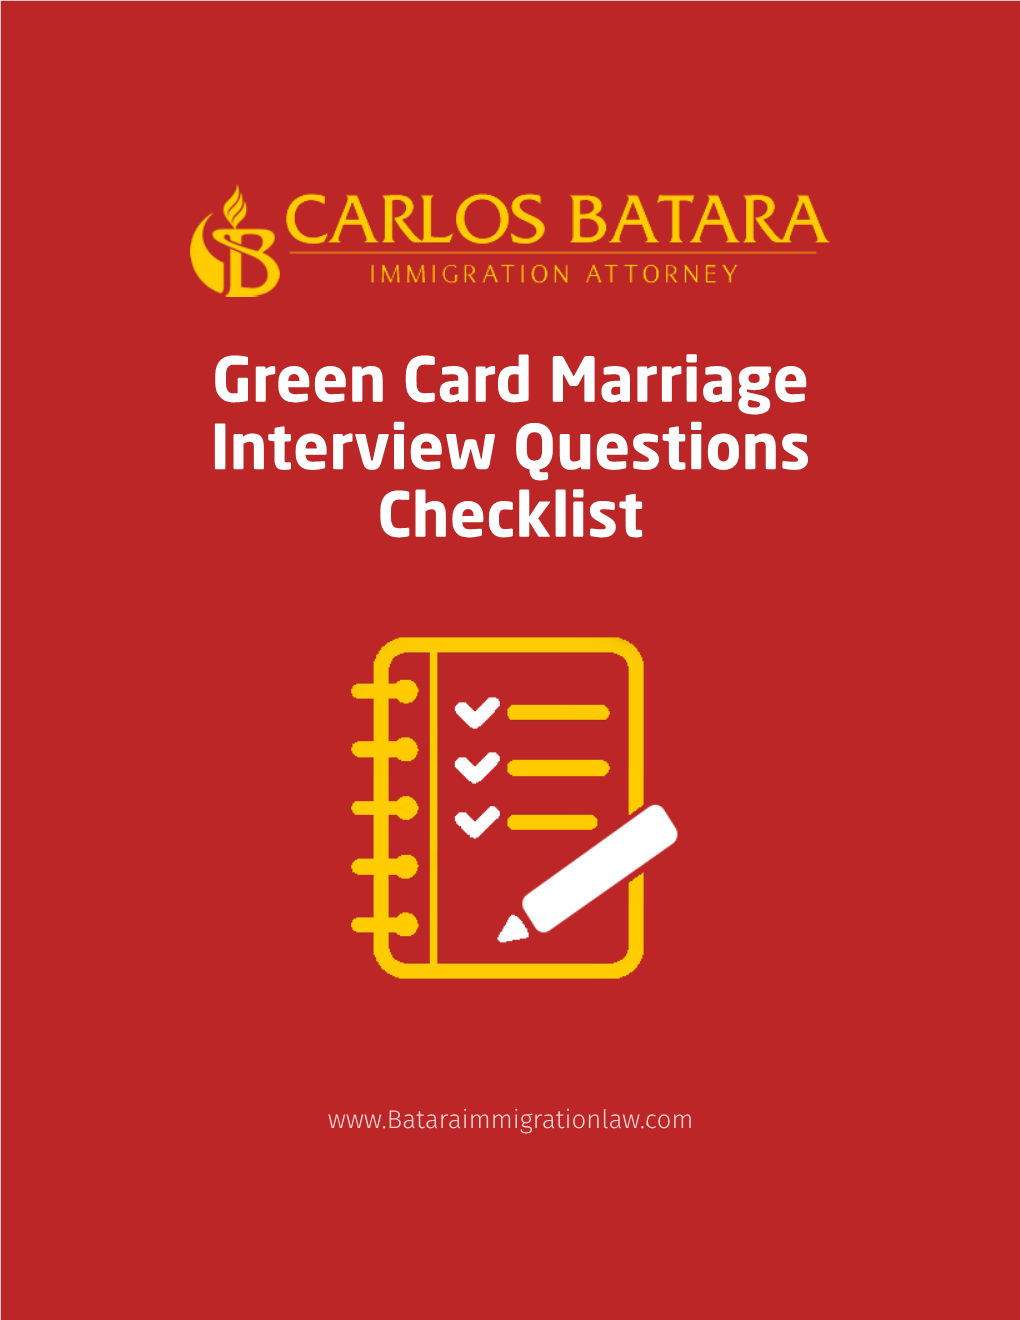 Green Card Marriage Interview Questions Checklist